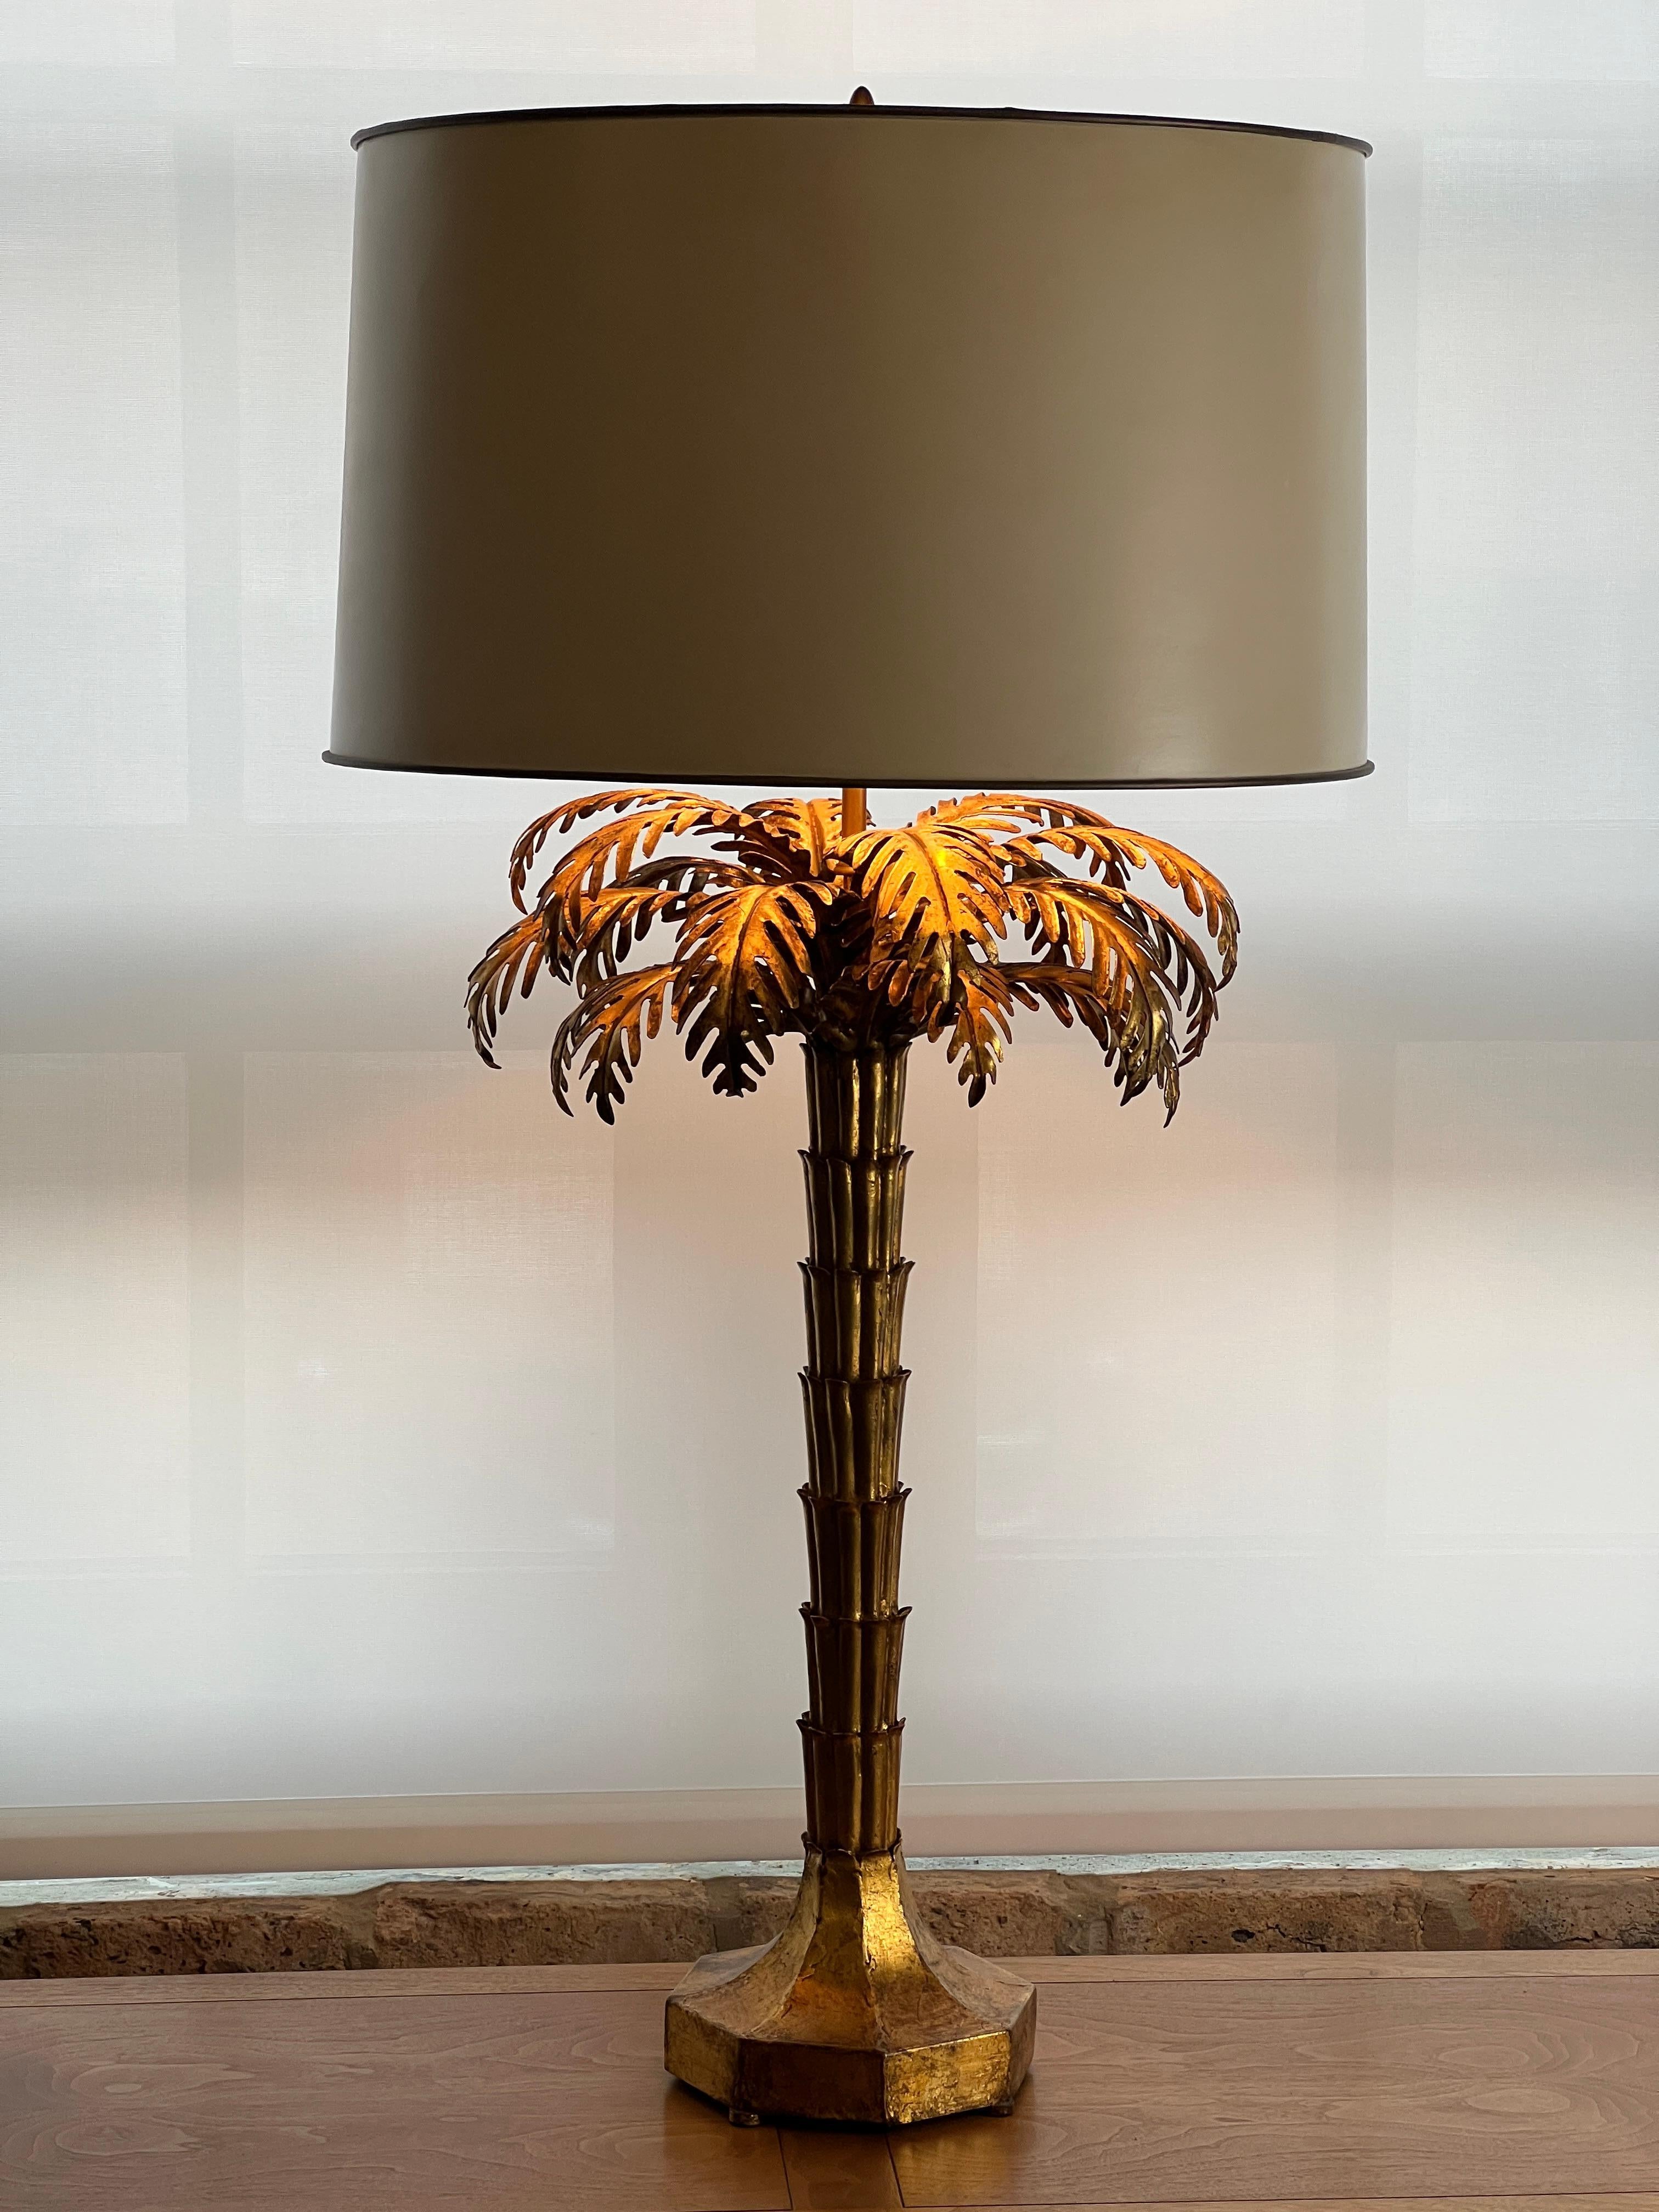 Beautiful and rare pair of 1950’s Warren Kessler (attr) Gilded Palm Tree Table Lamp (rarely found as a pair - with identical gilding and patina).  These are simply stunning.  The lamps are working and the gilding is in very good condition.  There